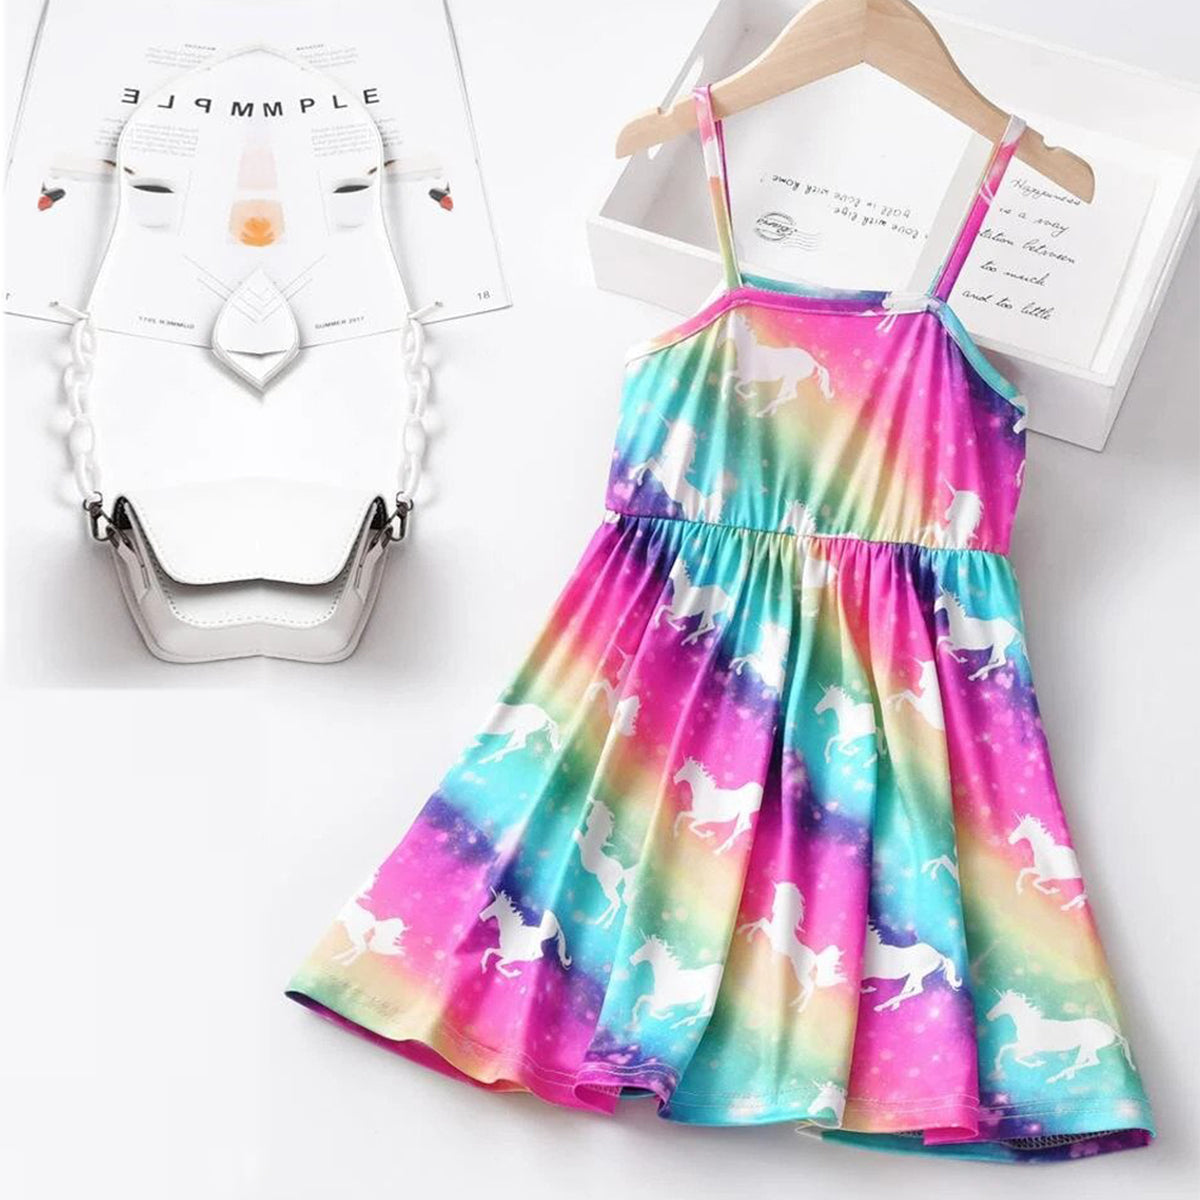 Princess BabyGirl's Multi Rainbow Designer Dresses_Frocks & Strip Lining Top And Shorts (Combo Pack Of 2) for Kids.